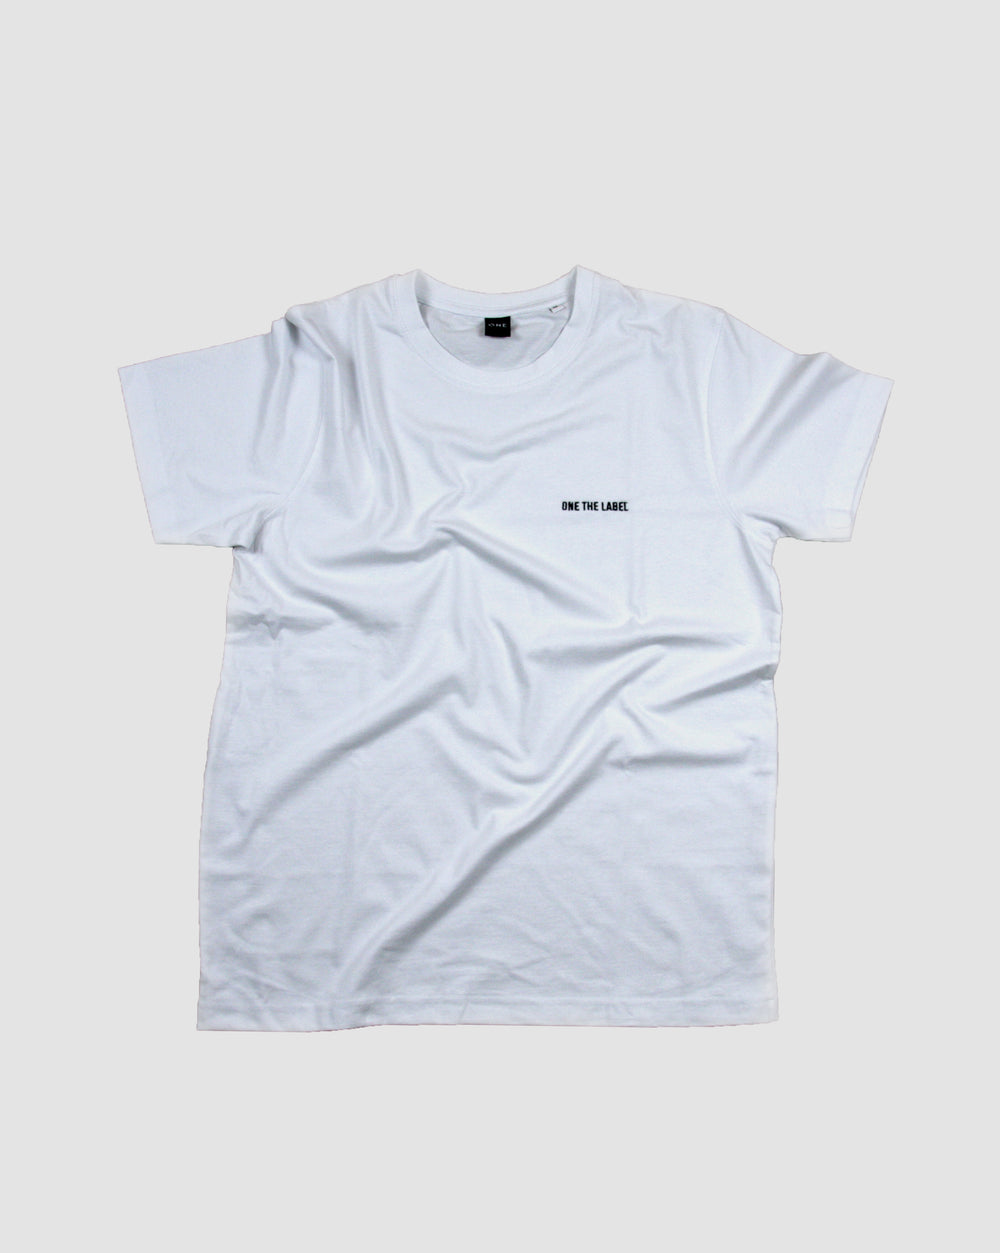 EMBROIDERED LOGO T-SHIRT WHITE – ONE THE LABEL